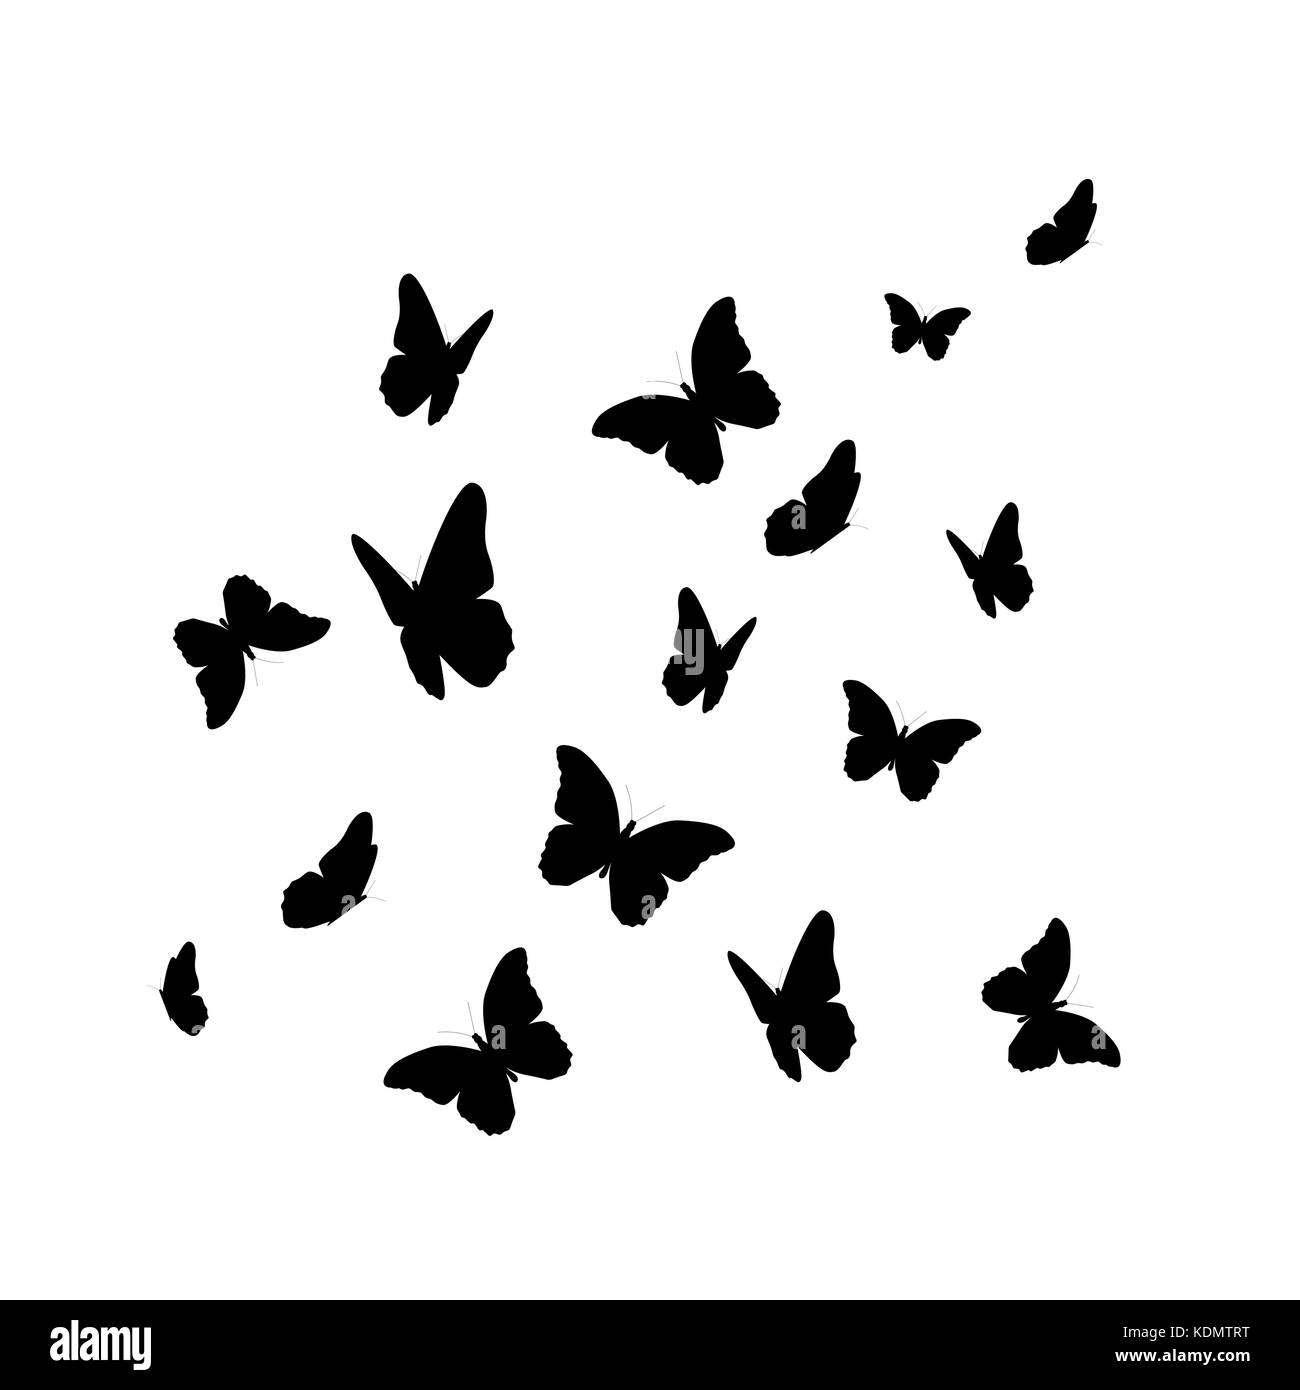 Beautifil Butterfly Silhouette Isolated on White Background Vect Stock Vector